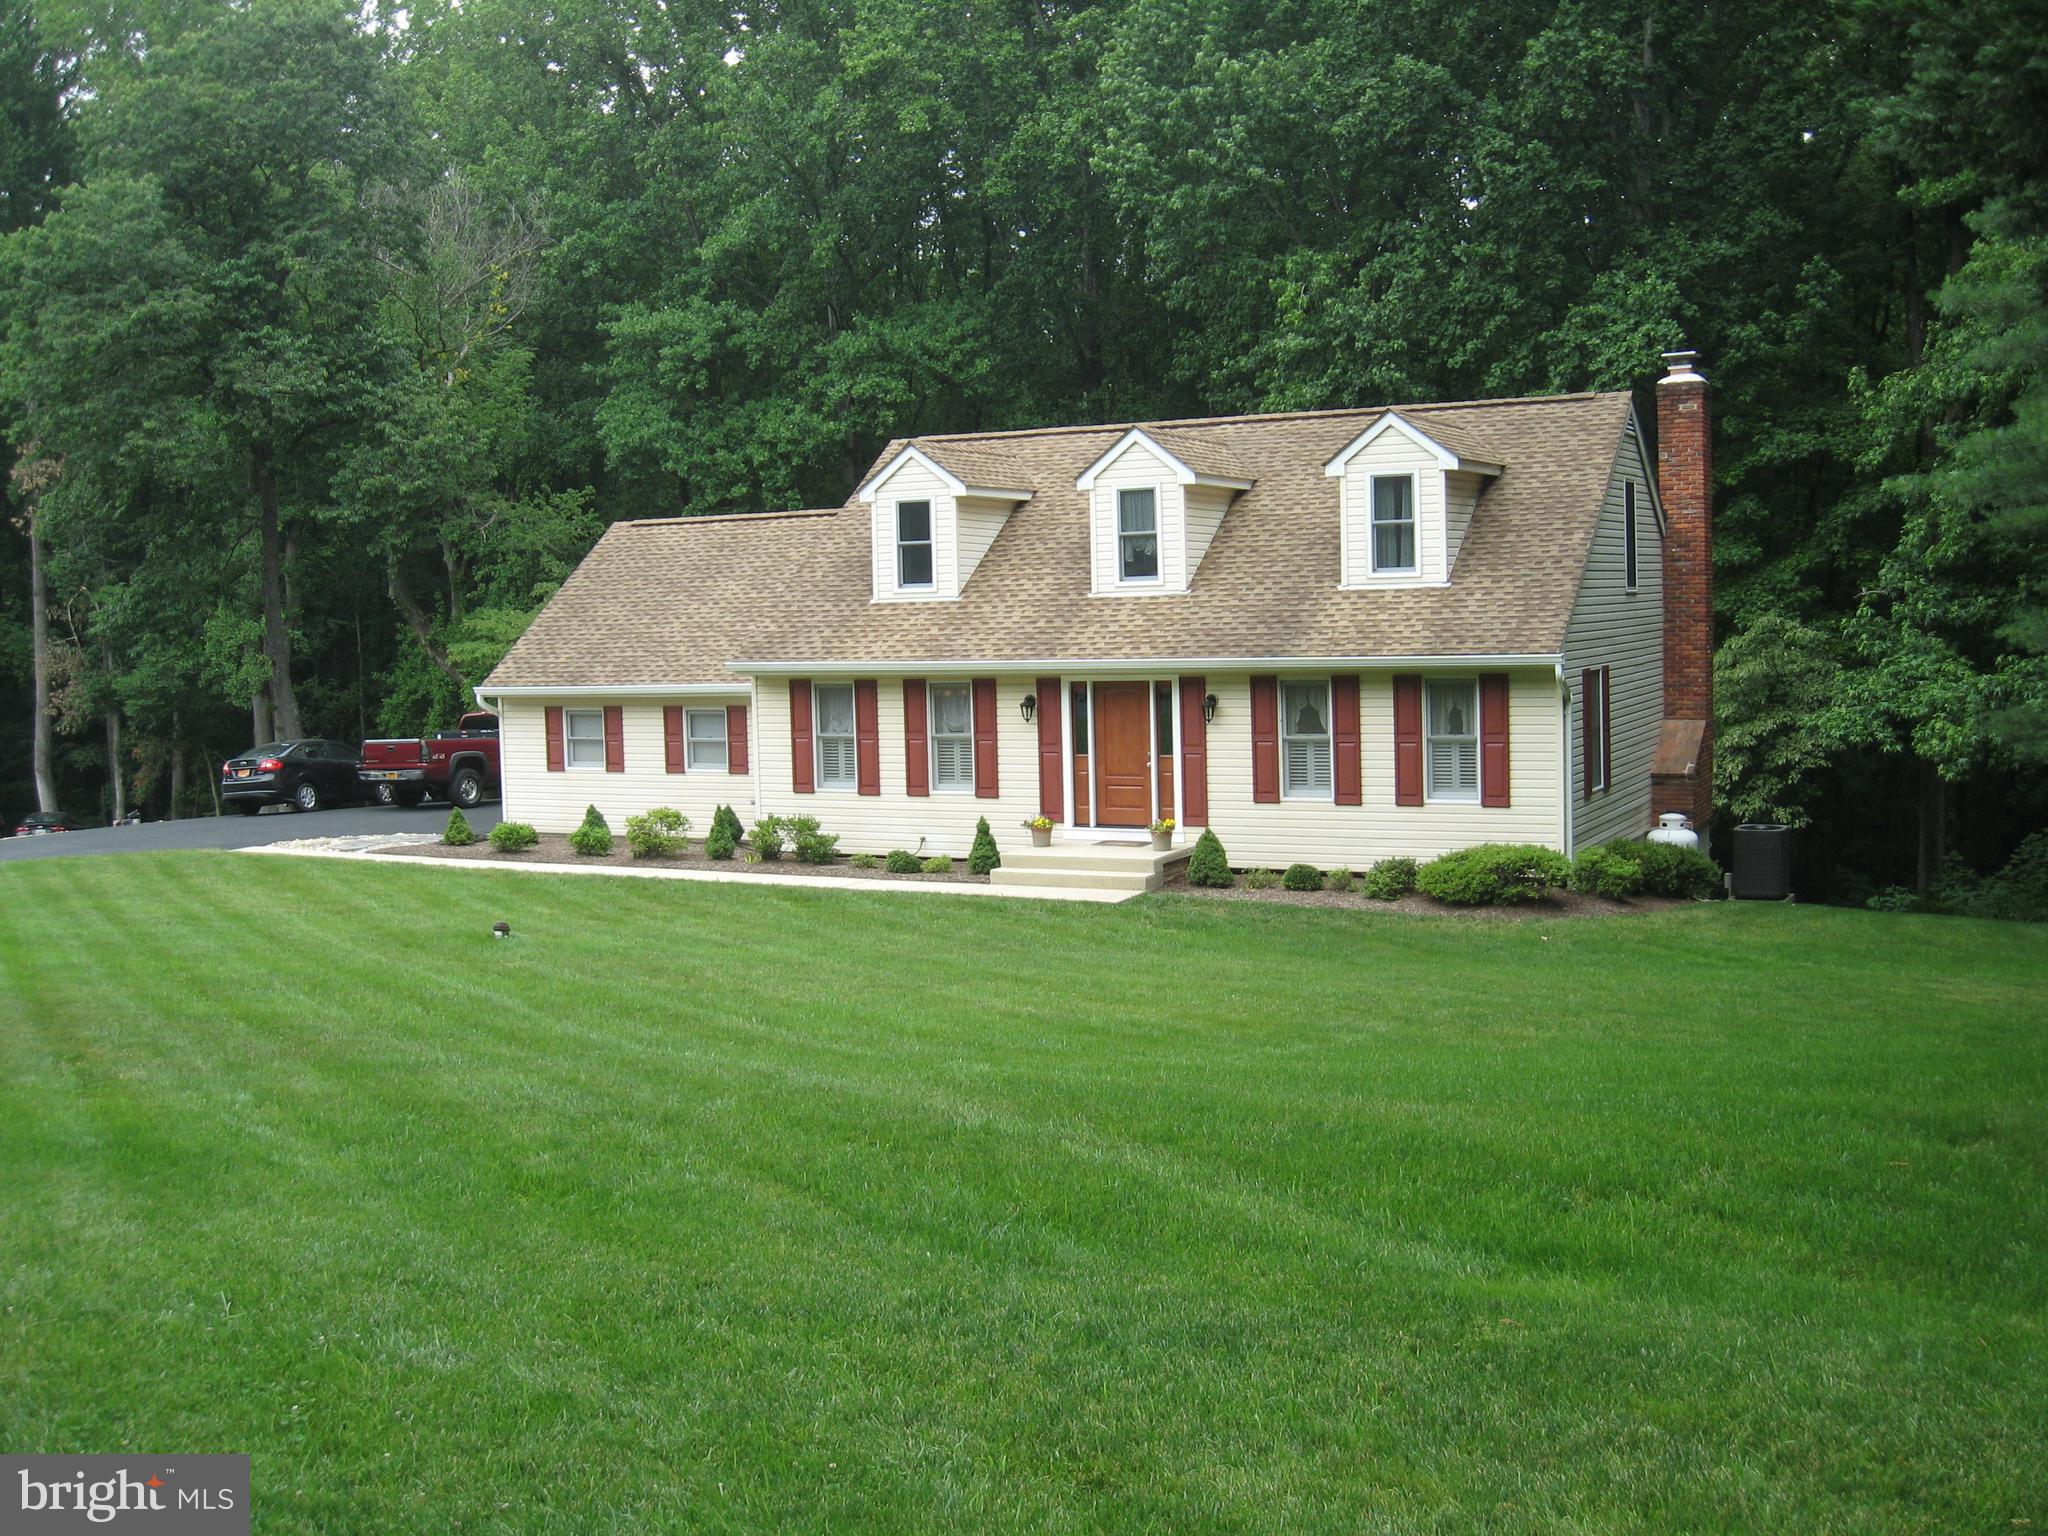 a view of house with a big yard and large trees